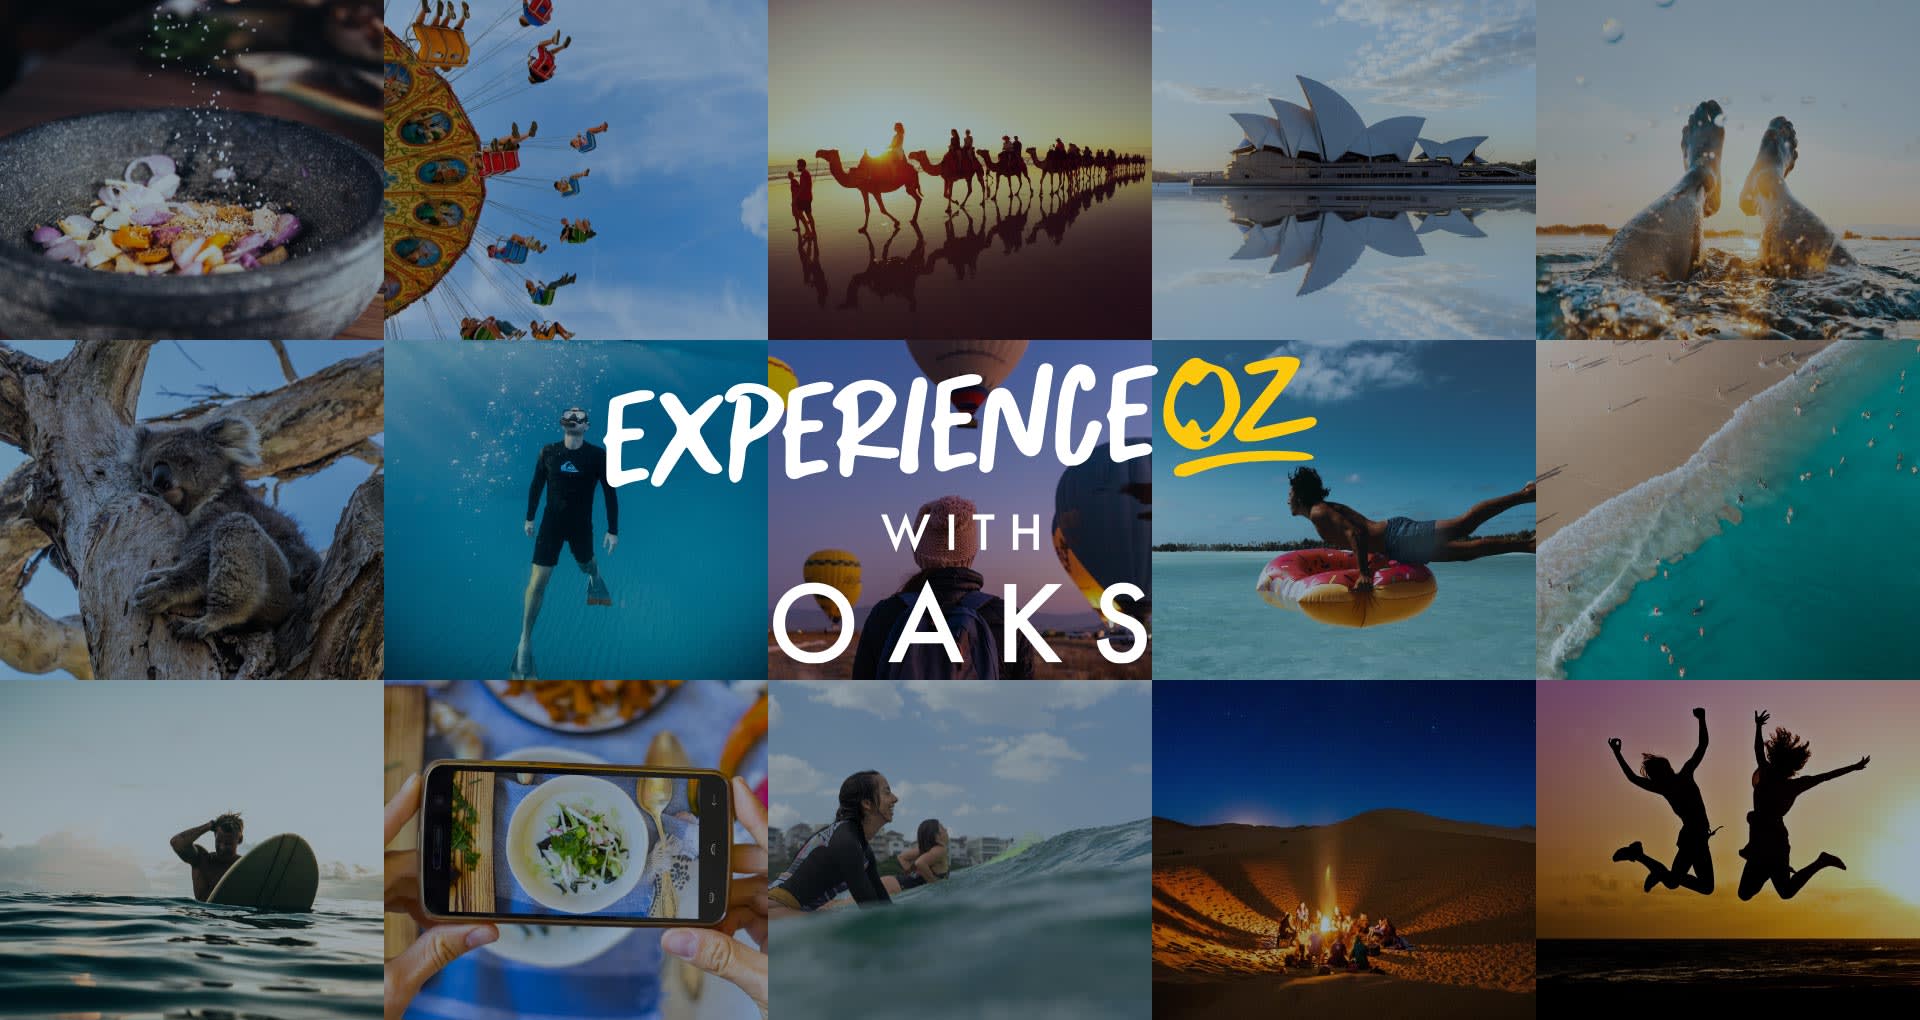 Experiences with Oaks and Experience OZ